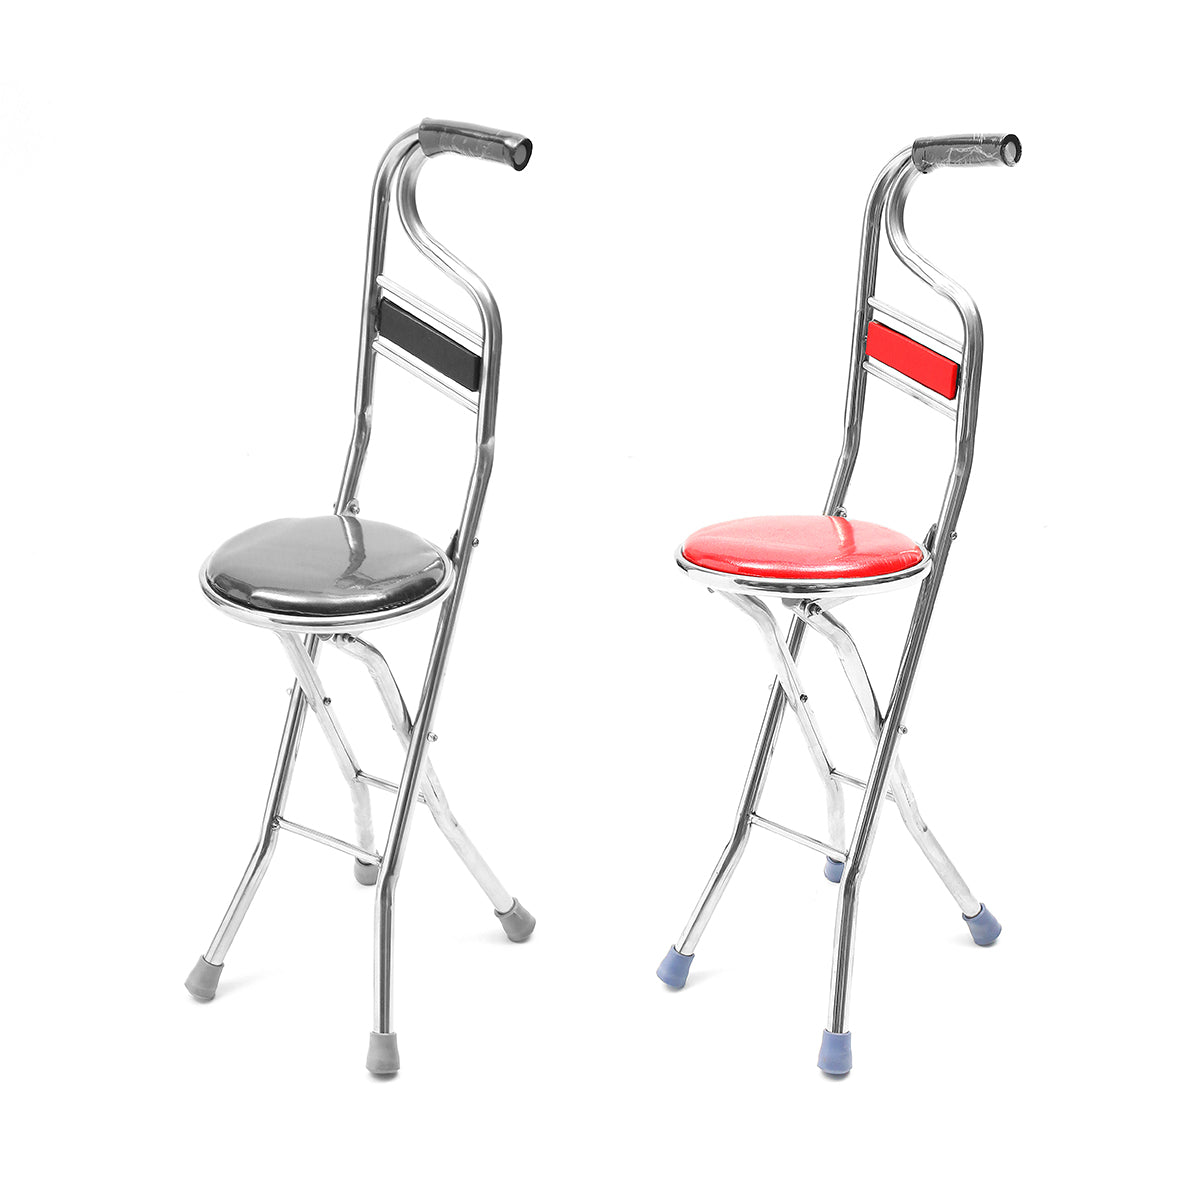 PortaSeat™ Stainless Steel Portable Folding Chair Seat Stool